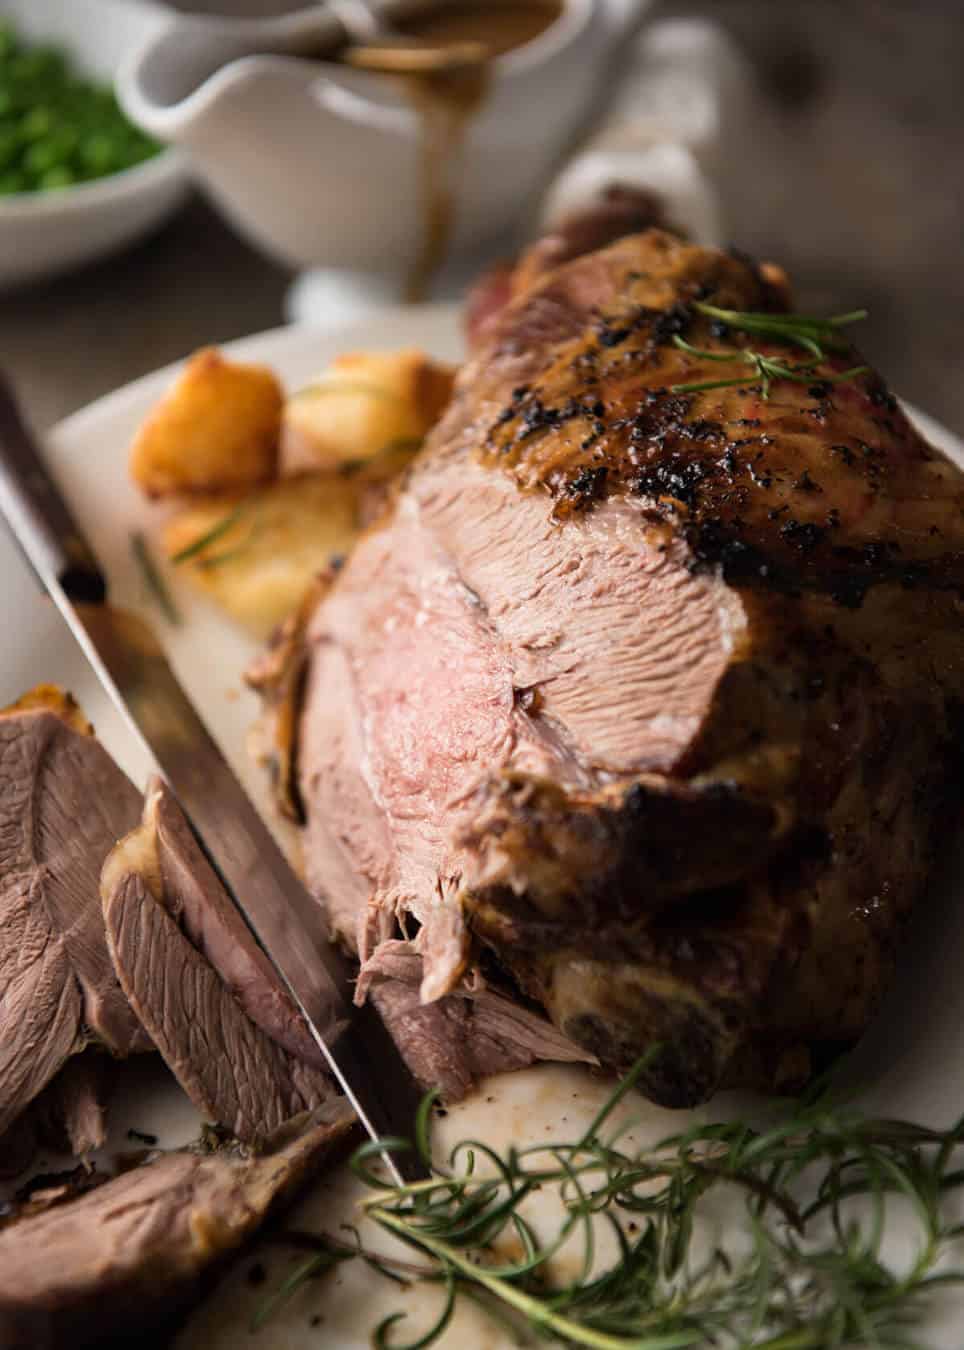 A classic, perfectly cooked Roast Lamb Leg with a classic smooth, rich gravy. It